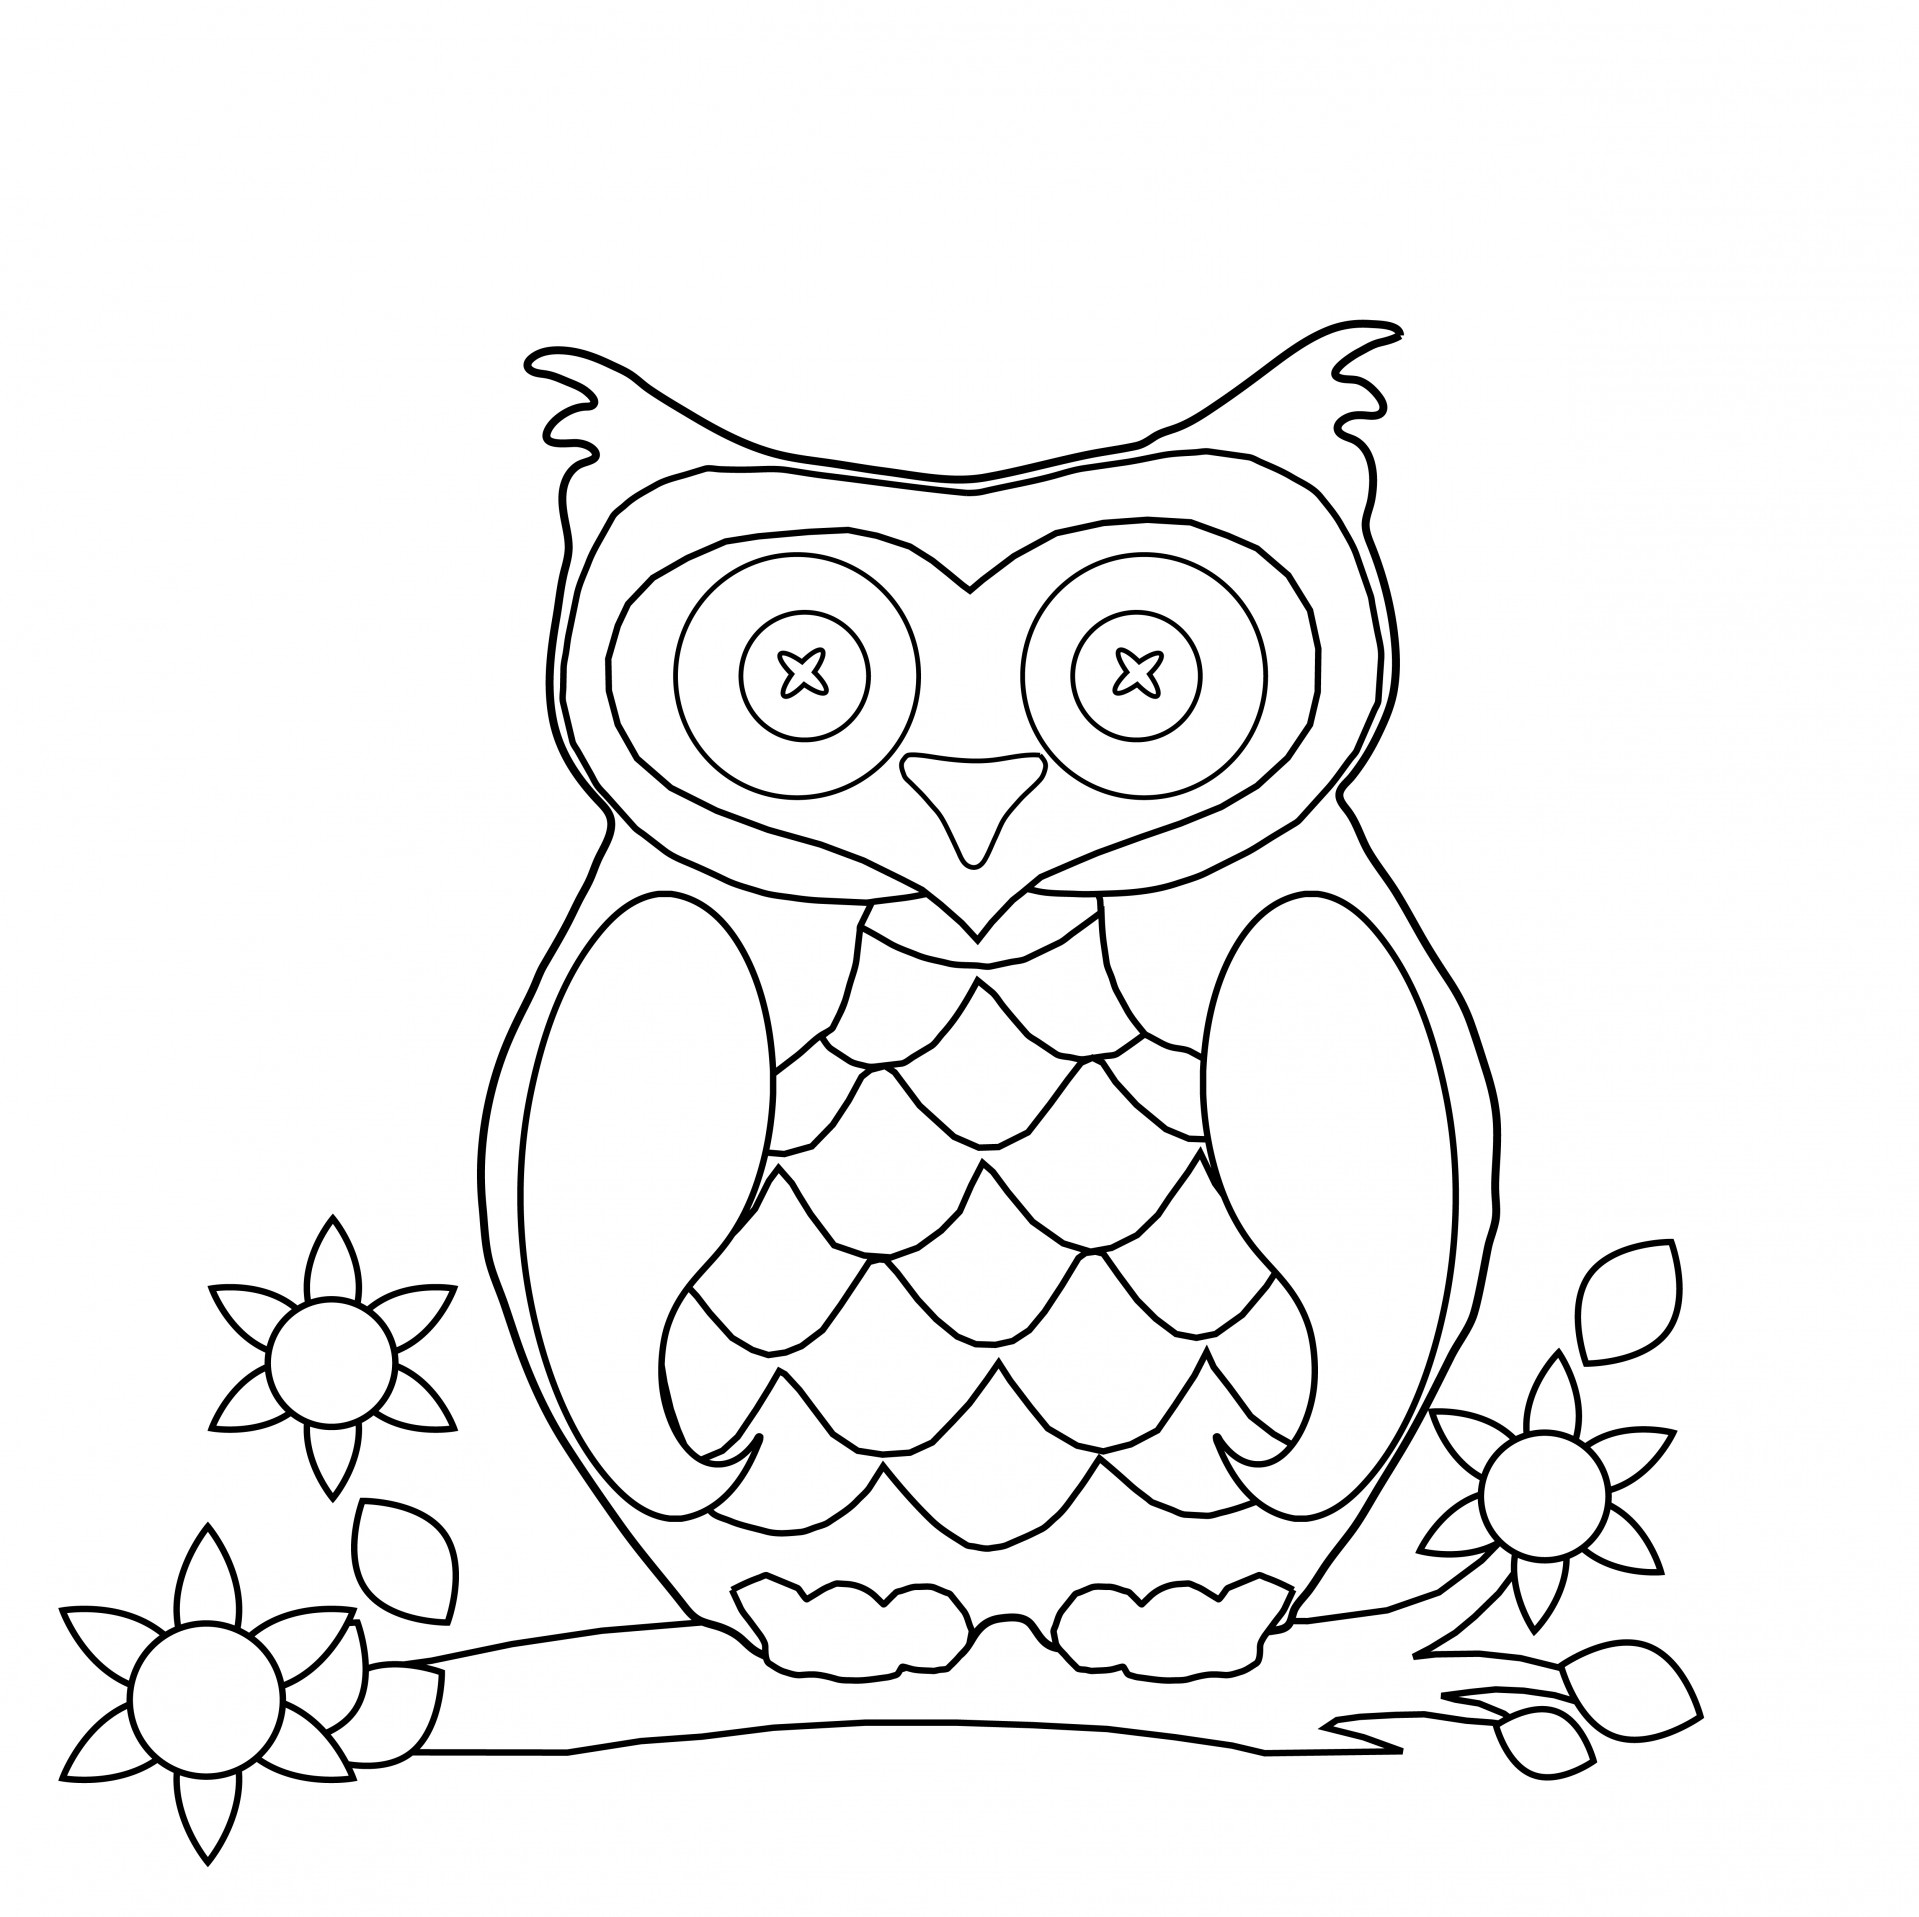 gingerbread-house-coloring-pages-owl-coloring-page-clipart-best